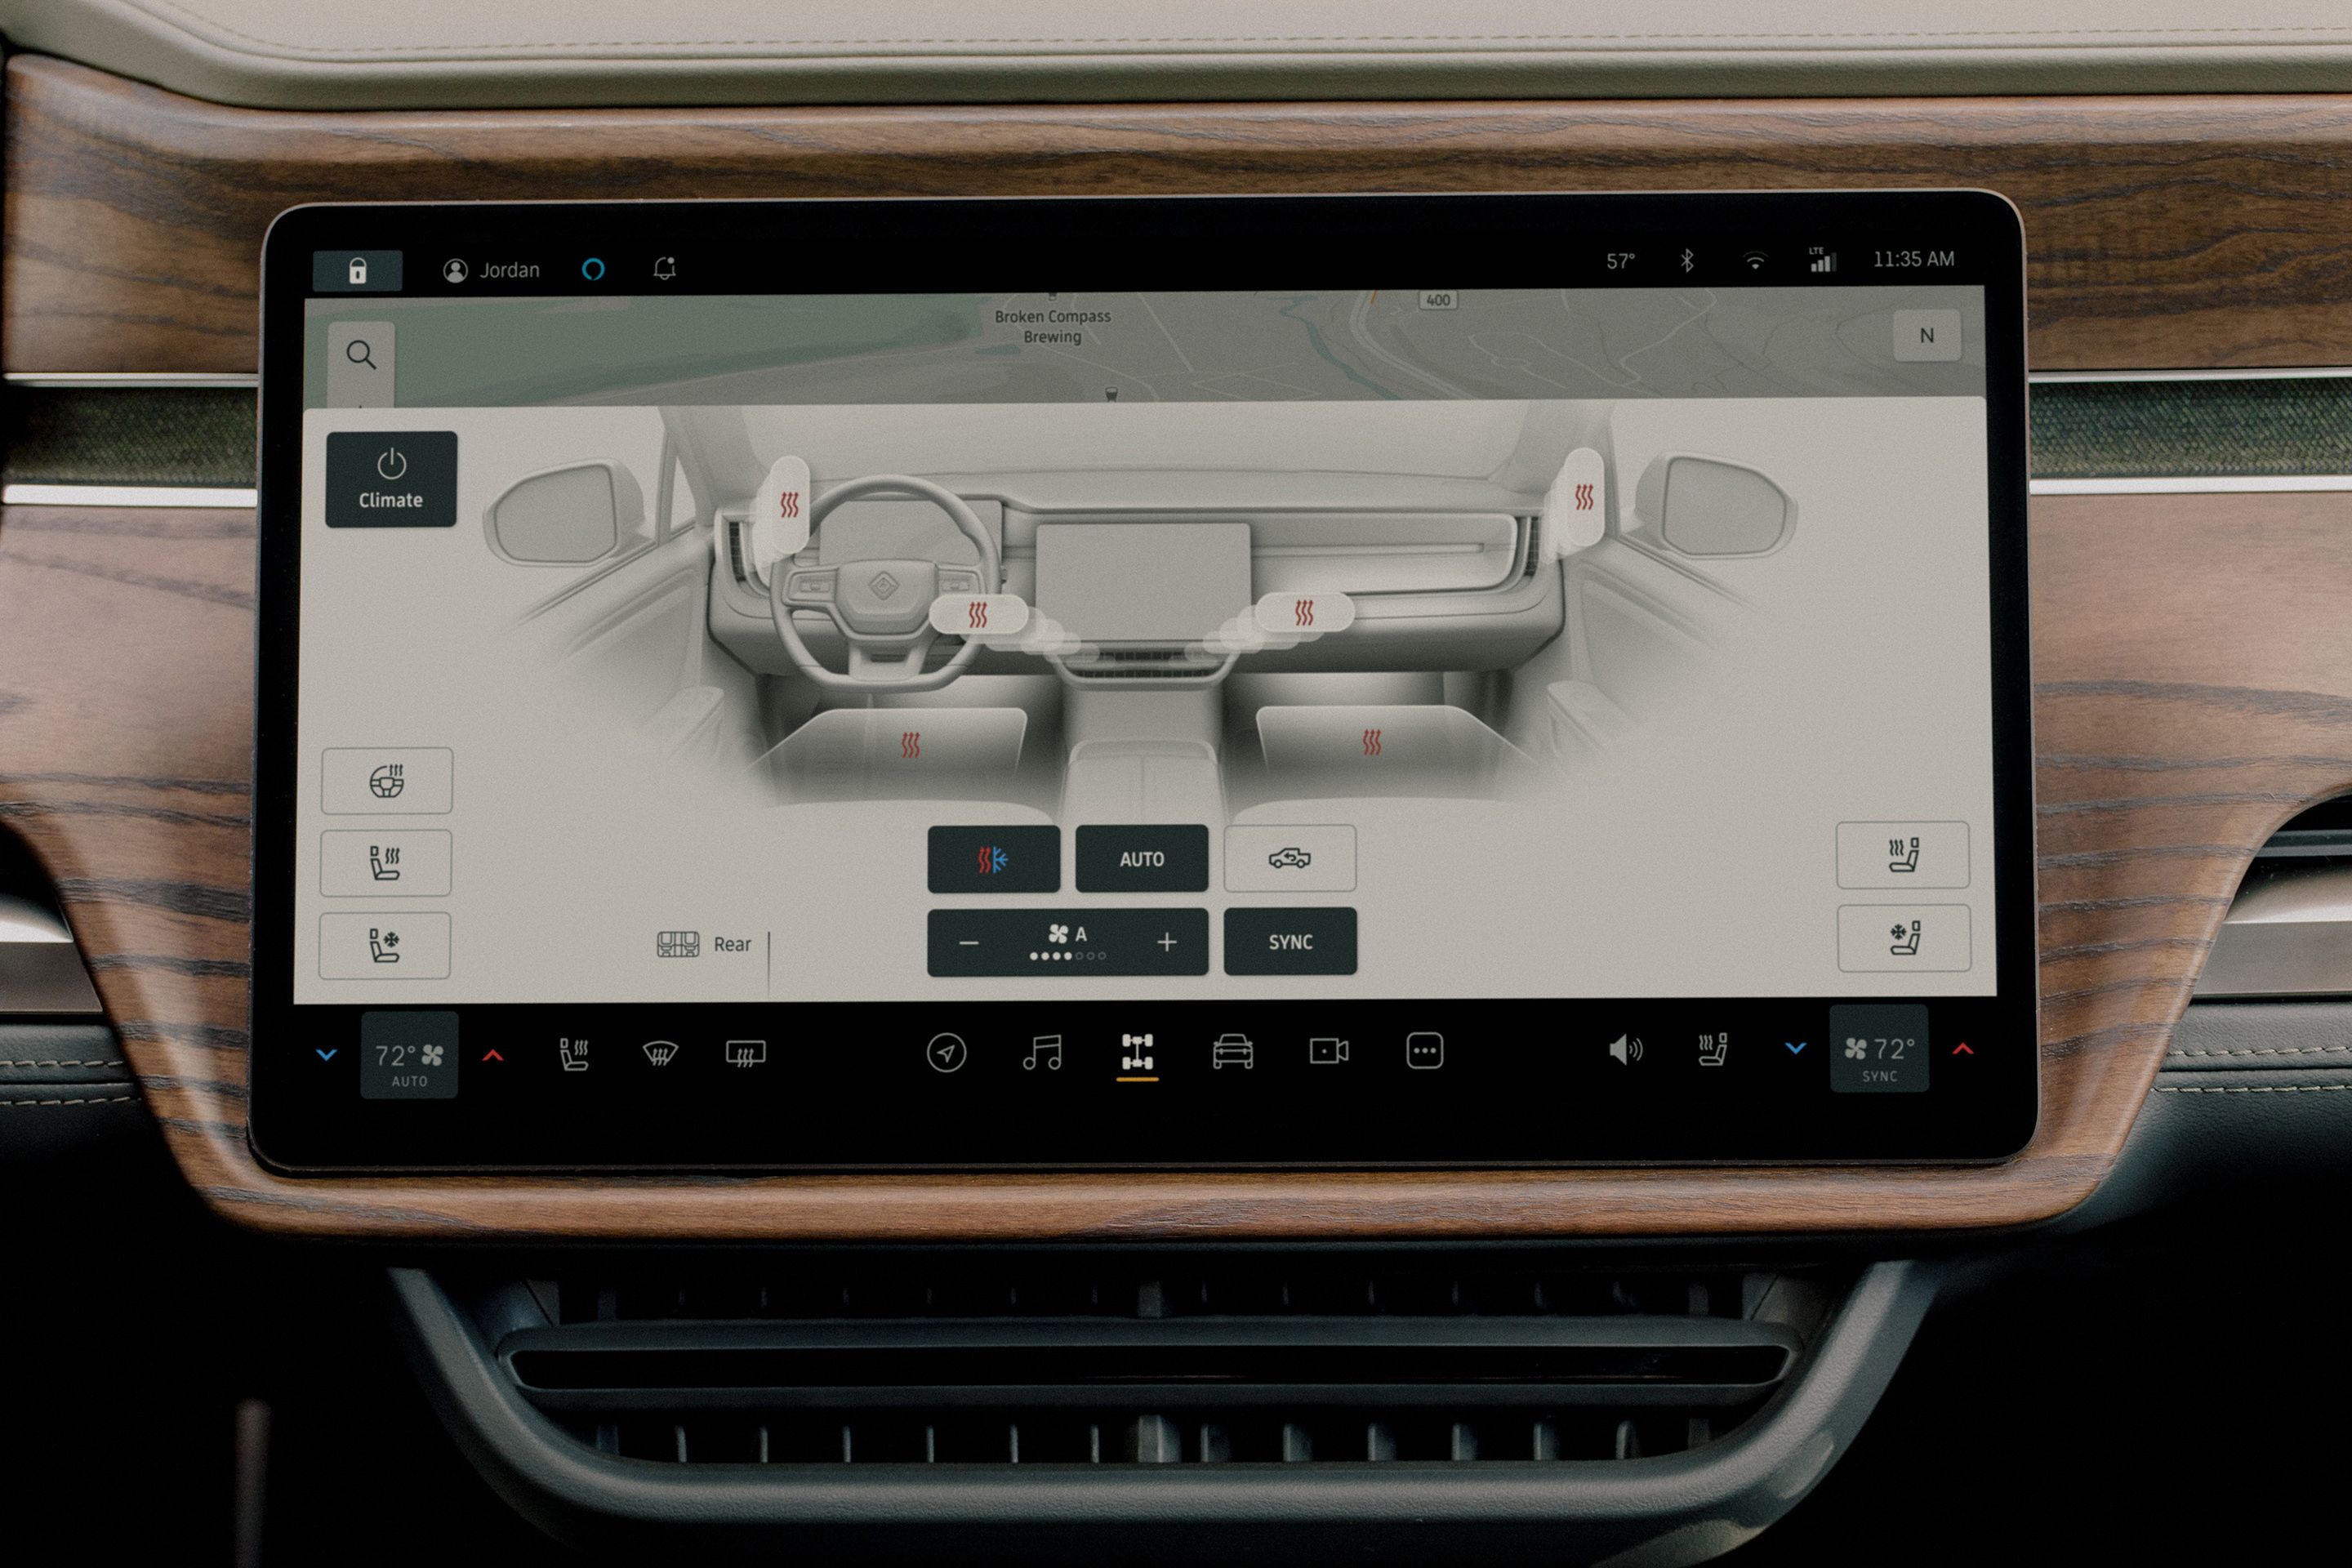 The touchscreen on a Rivian R1T pickup shows how you can adjust the airflow from the vents by dragging your finger across the virtual dashboard.